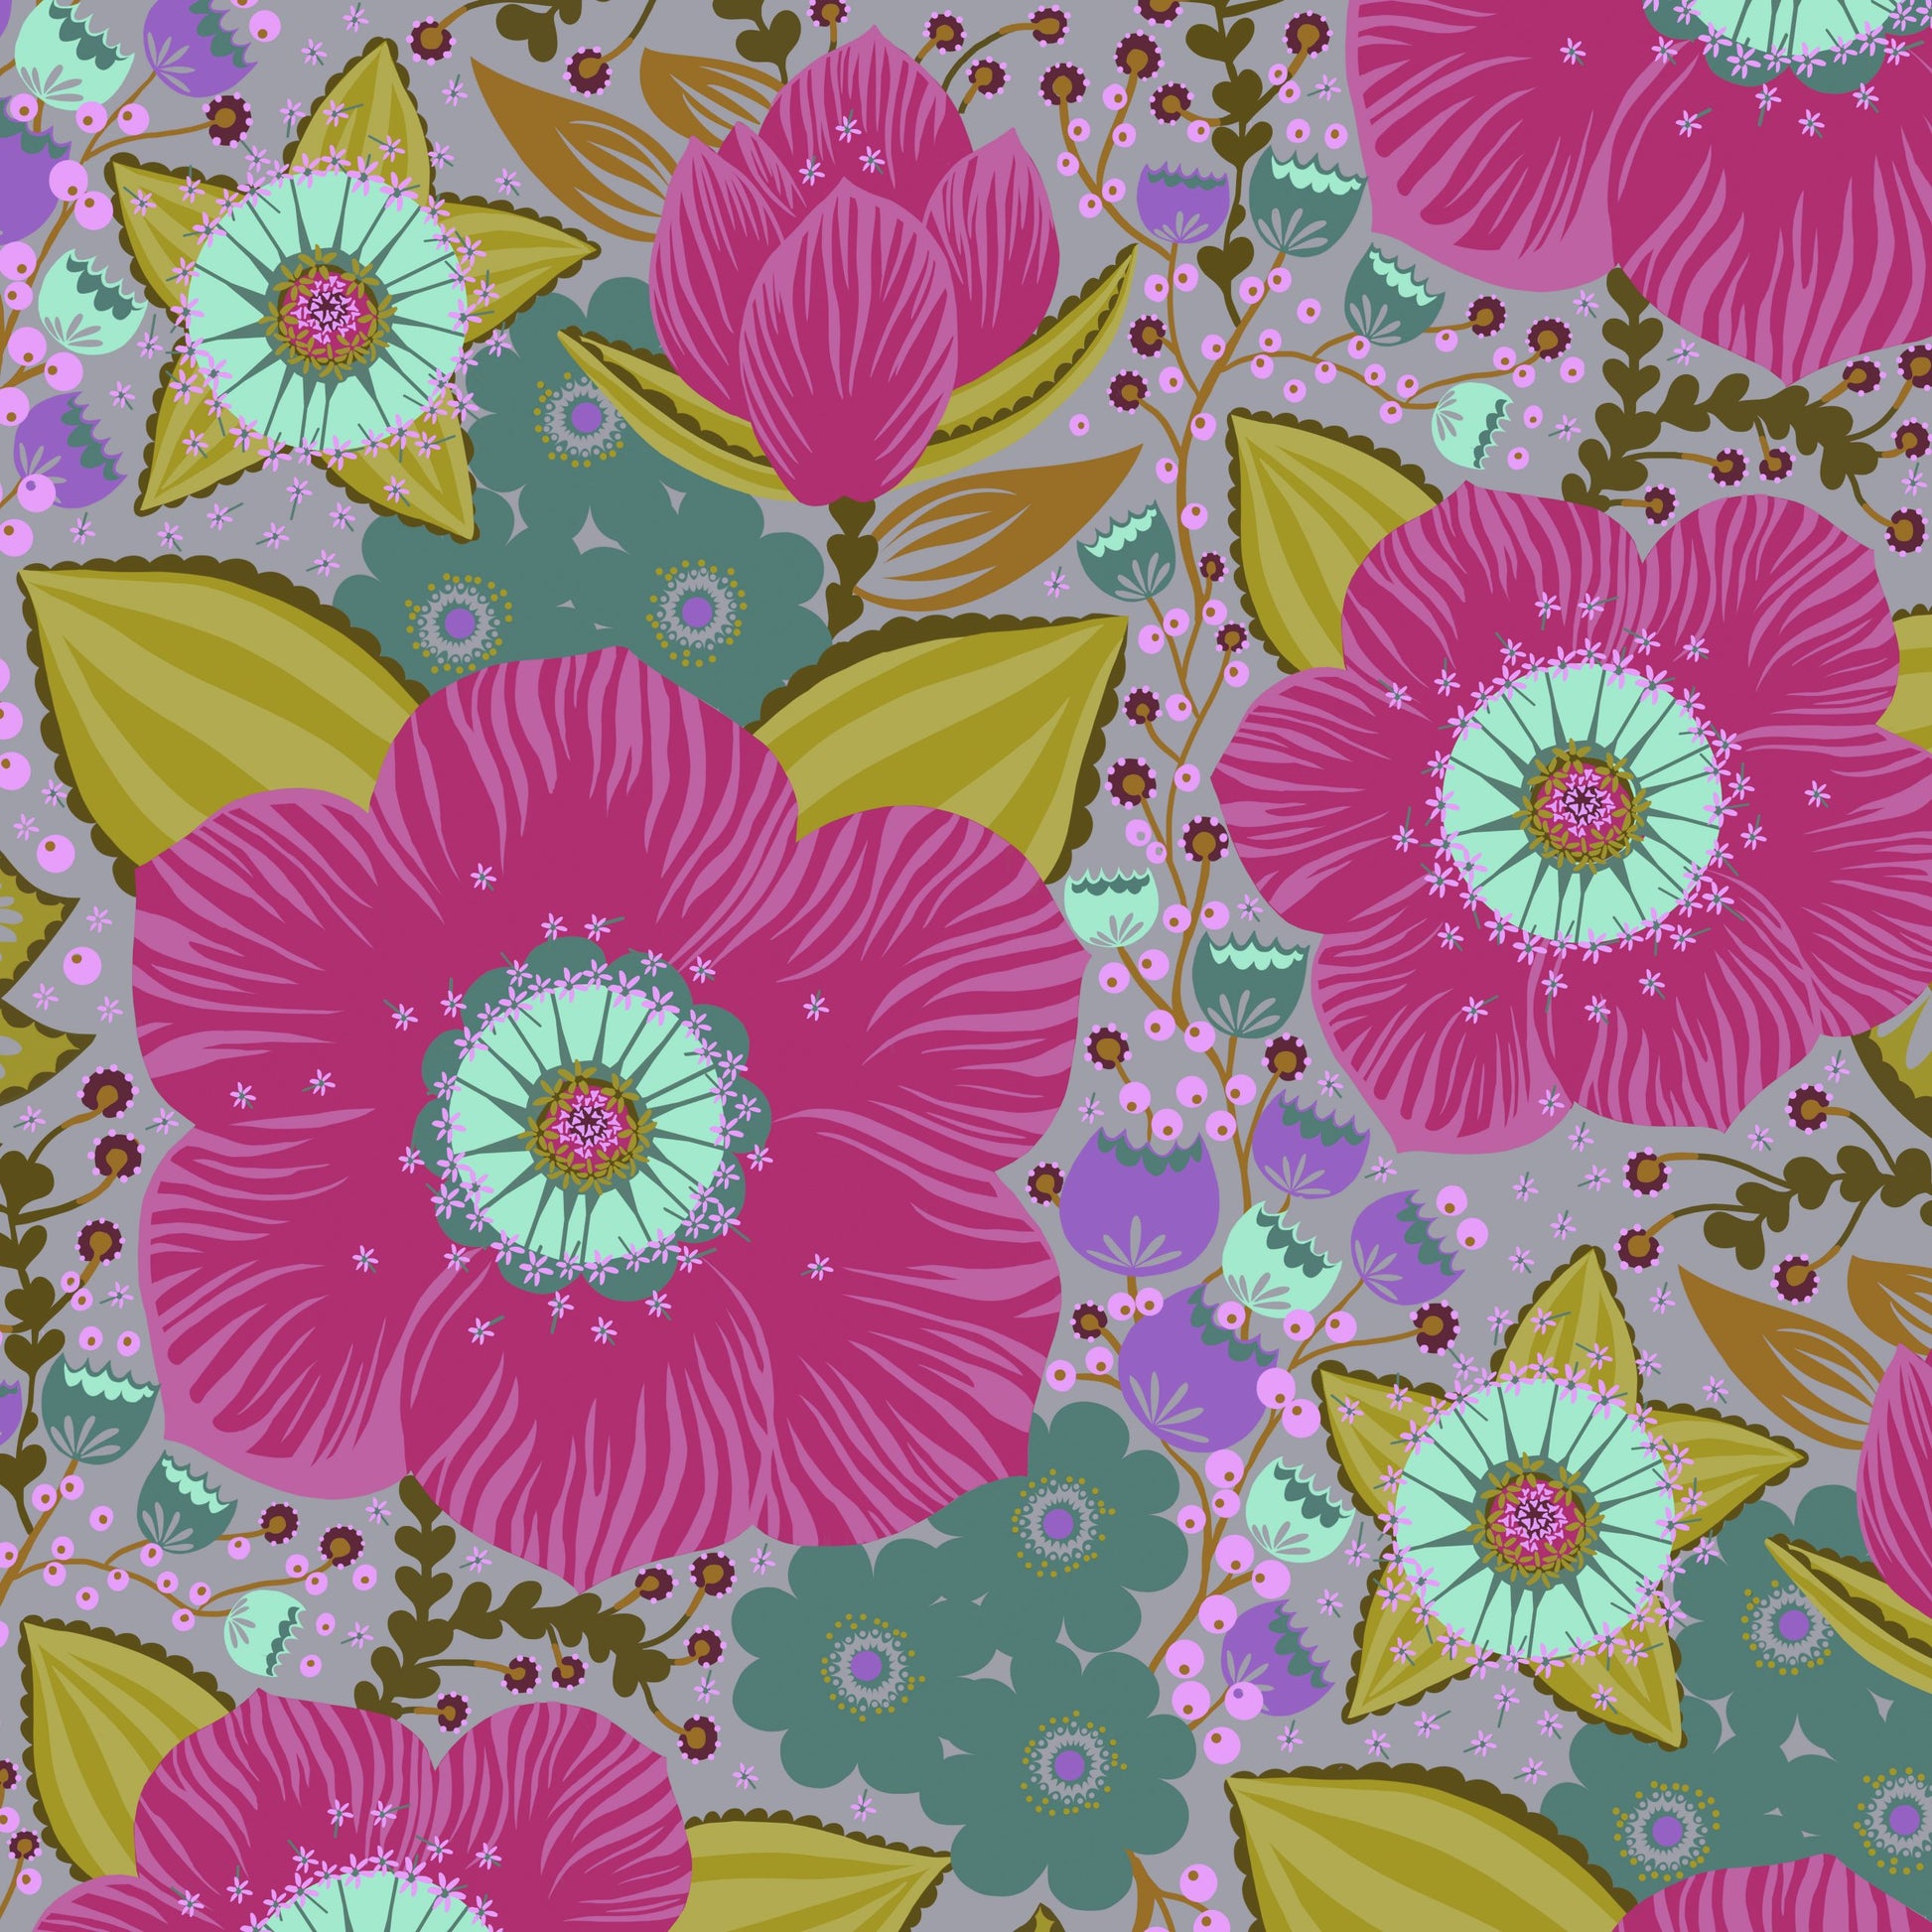 a bright floral design with large and small flowers on grey background